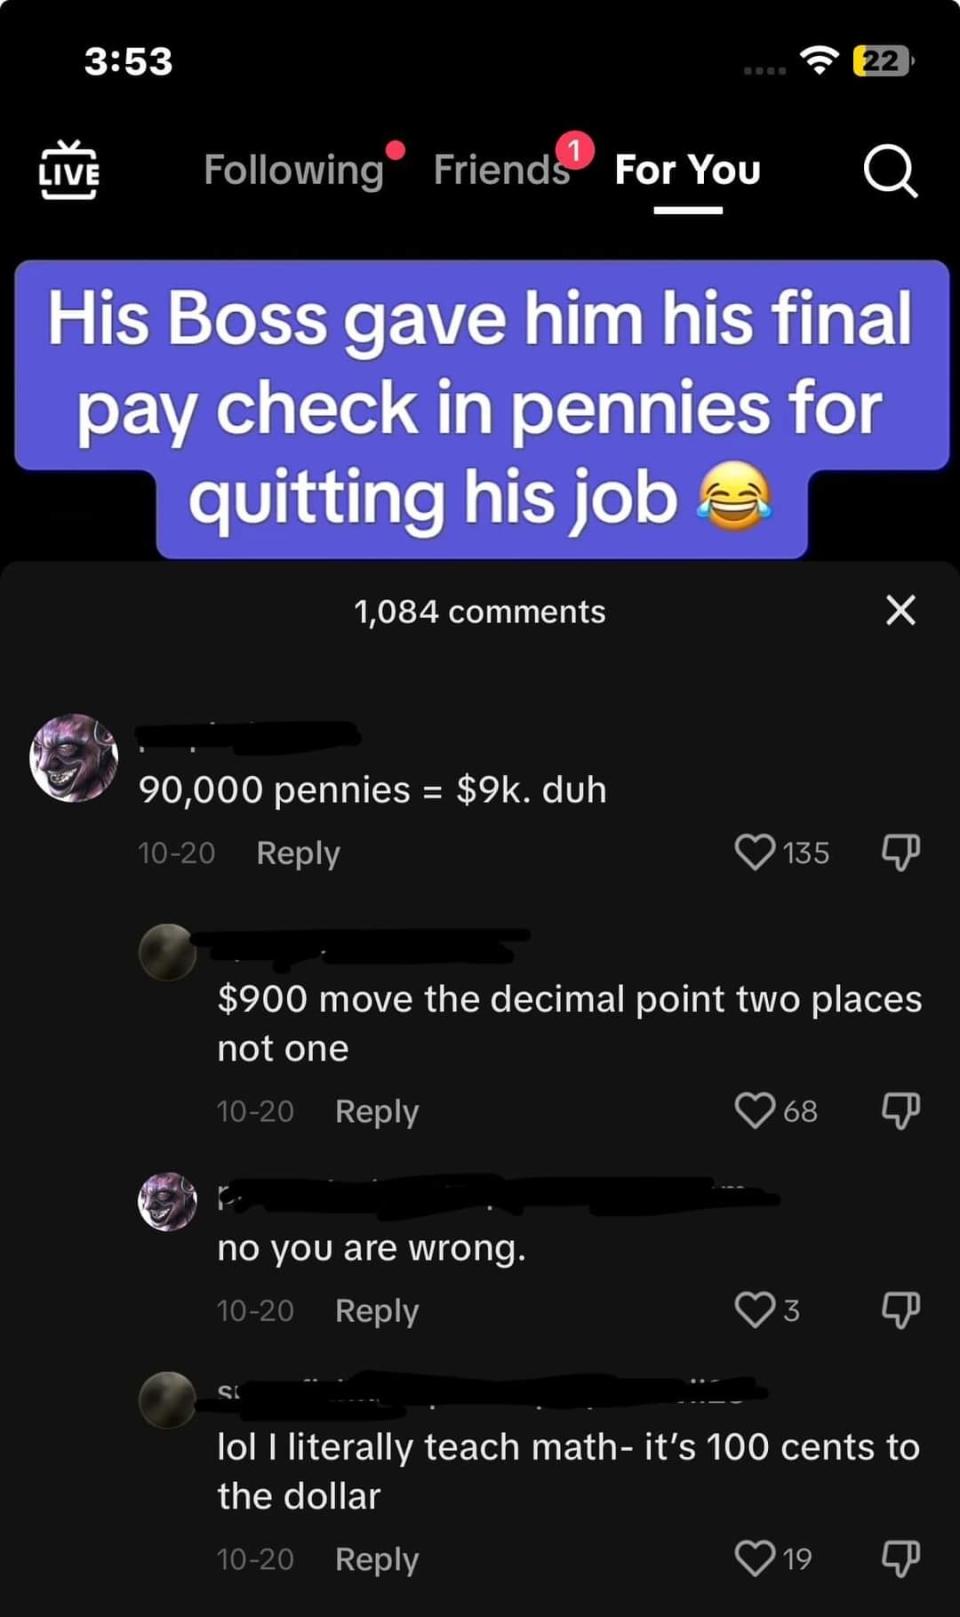 Boss gave employee his final paycheck in pennies for quitting, and someone says 